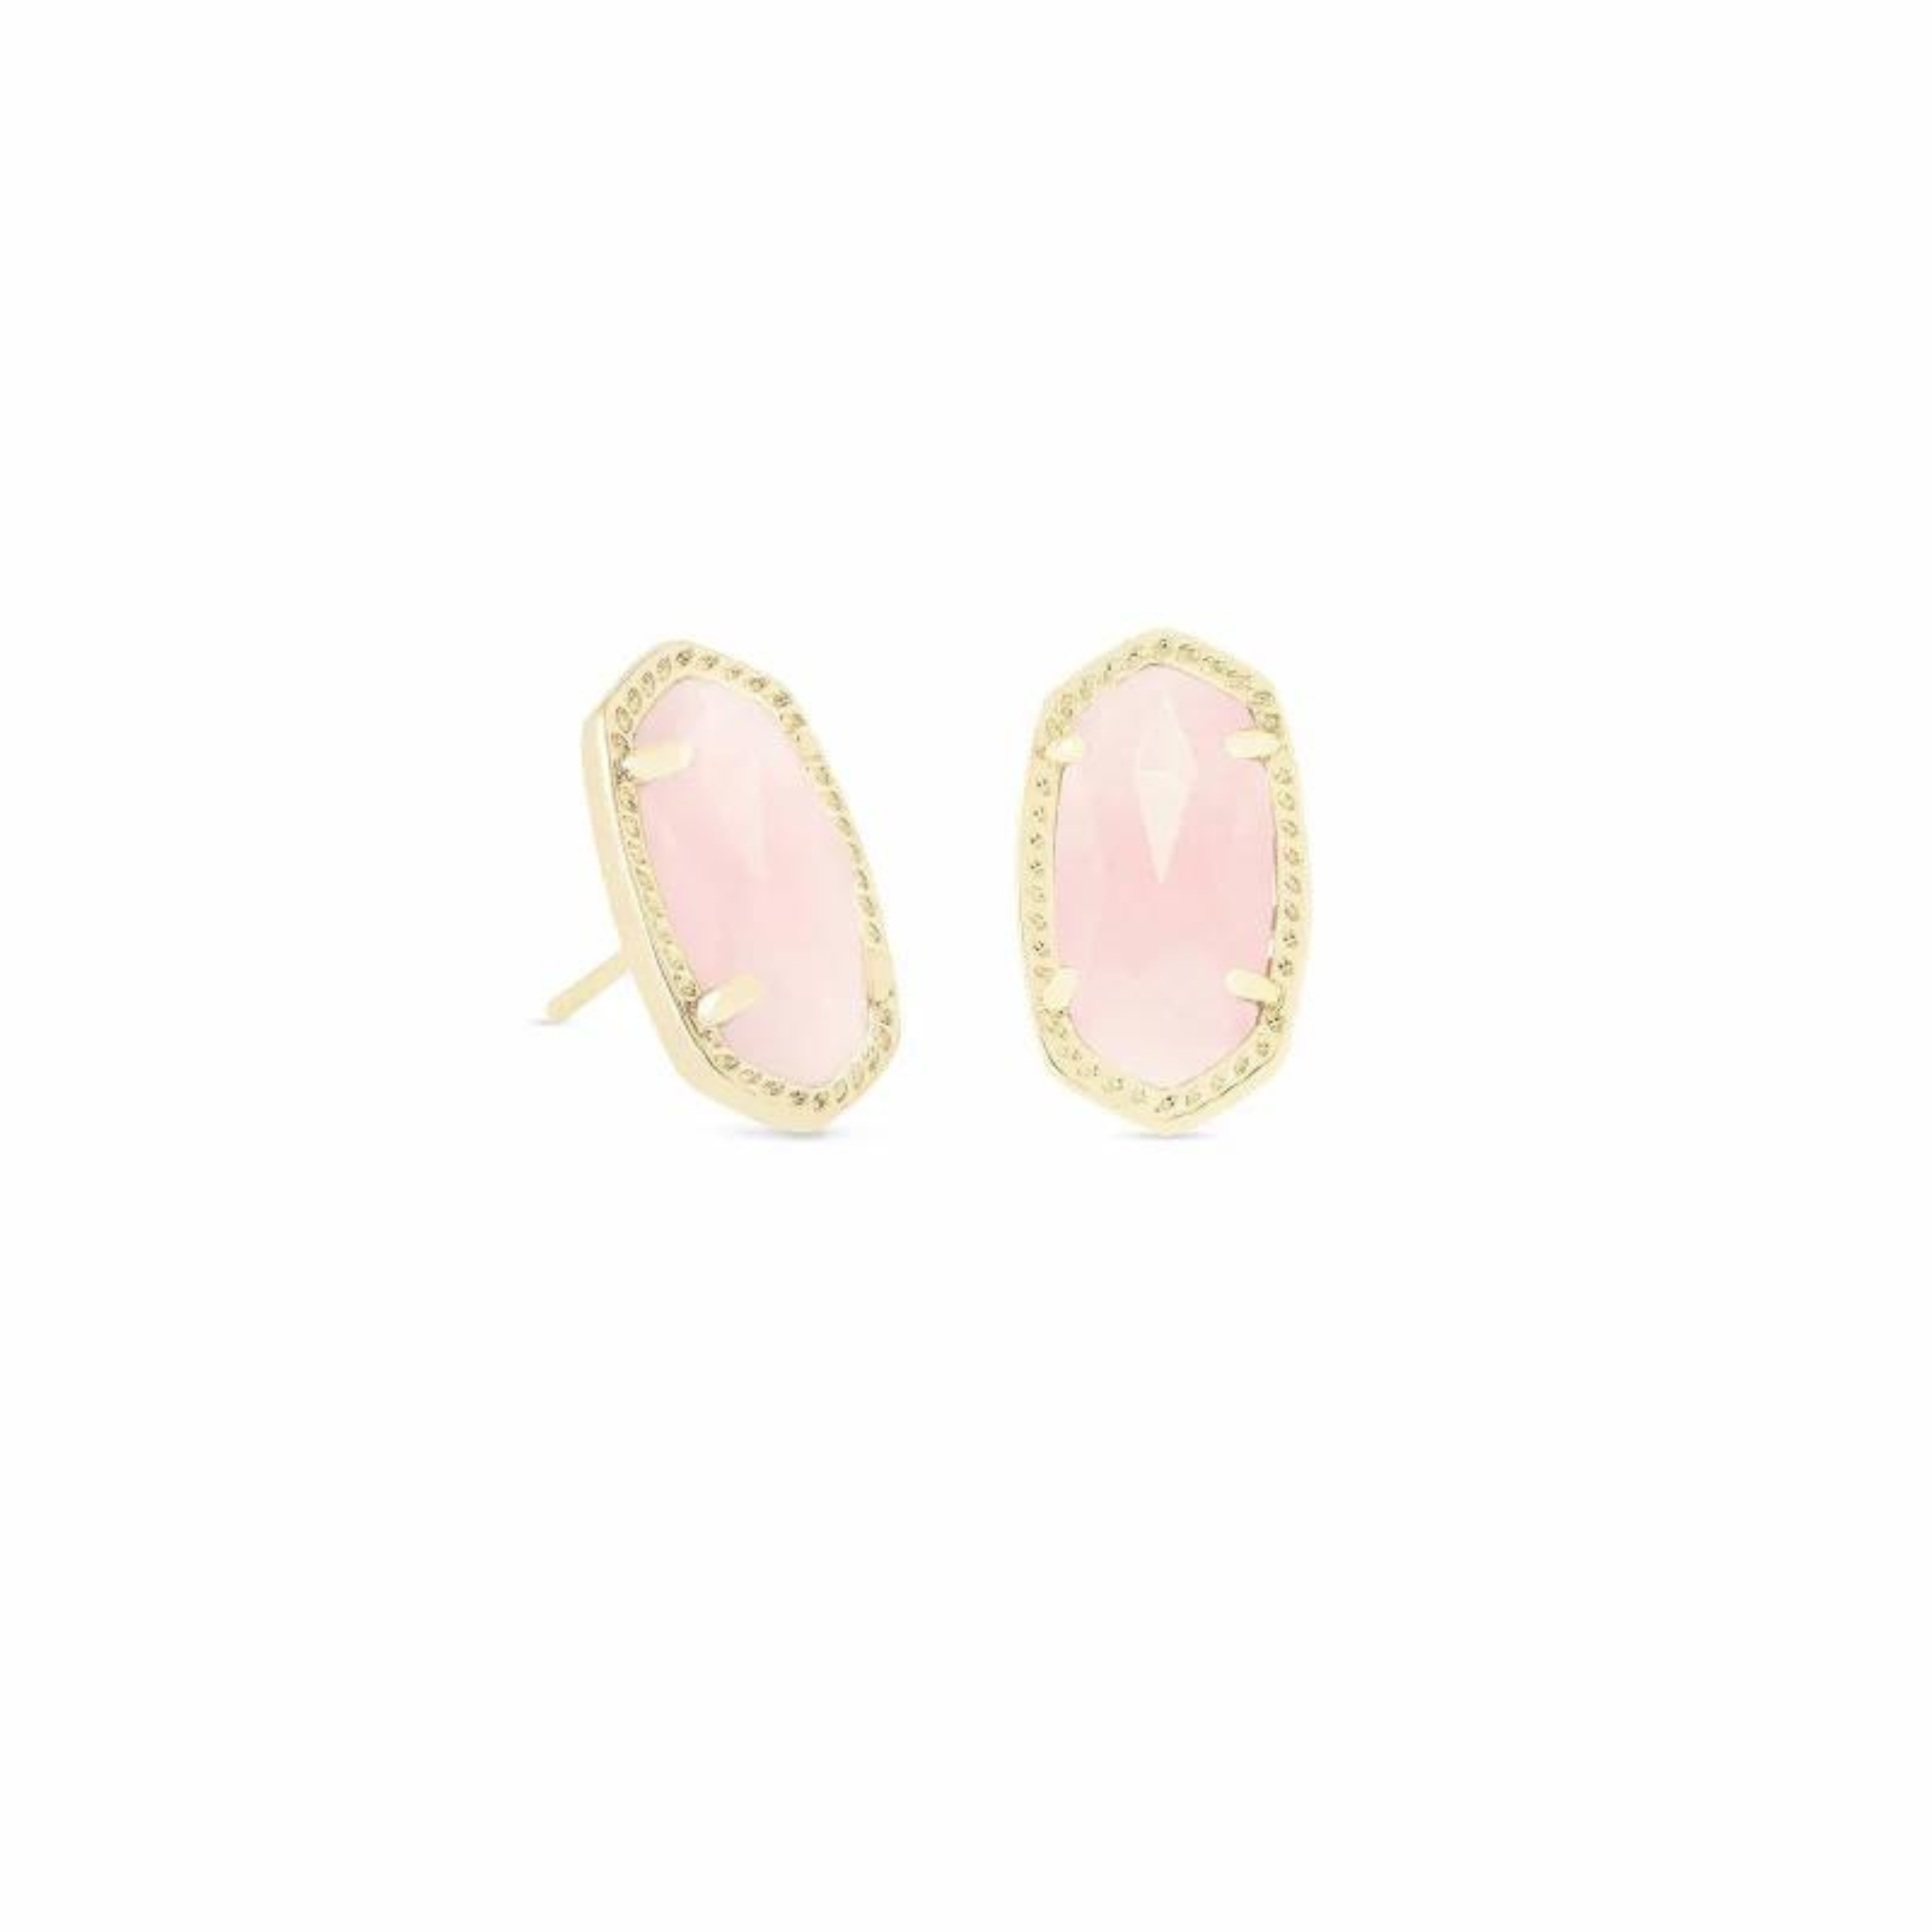 Gold stud earrings with rose quartz stone, pictured on a white background.